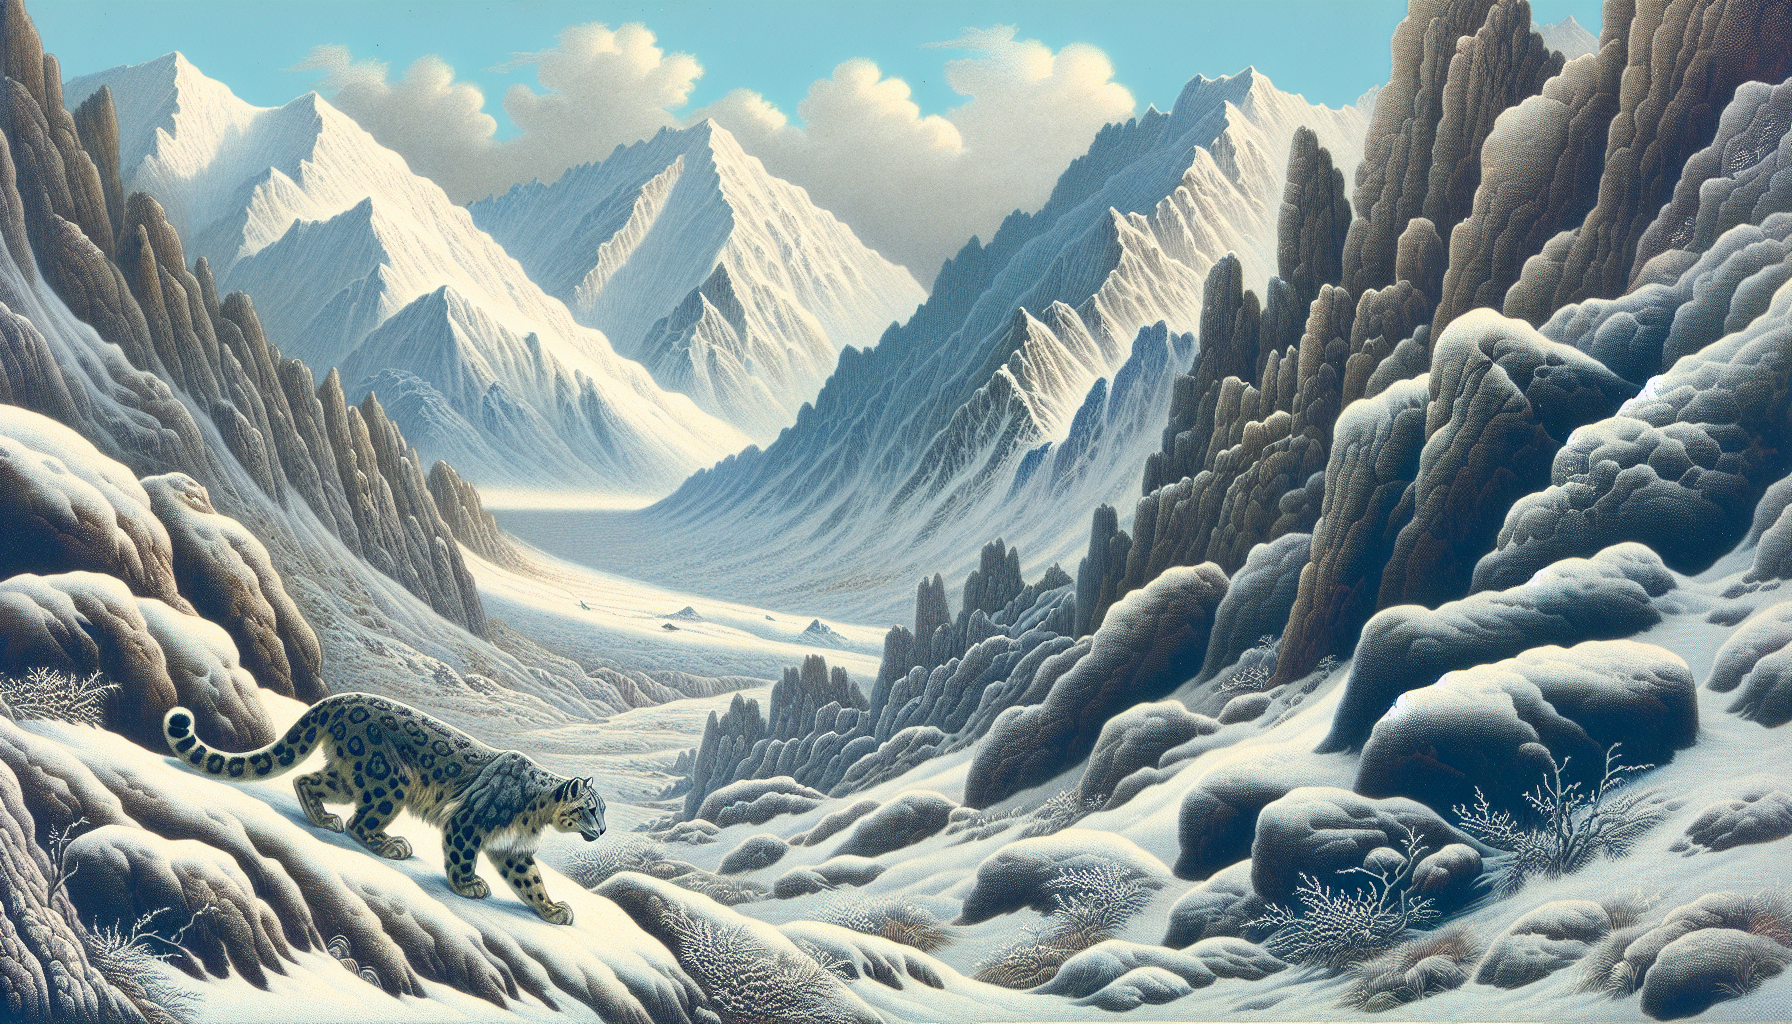 Illustration of the rugged mountain habitats of snow leopards